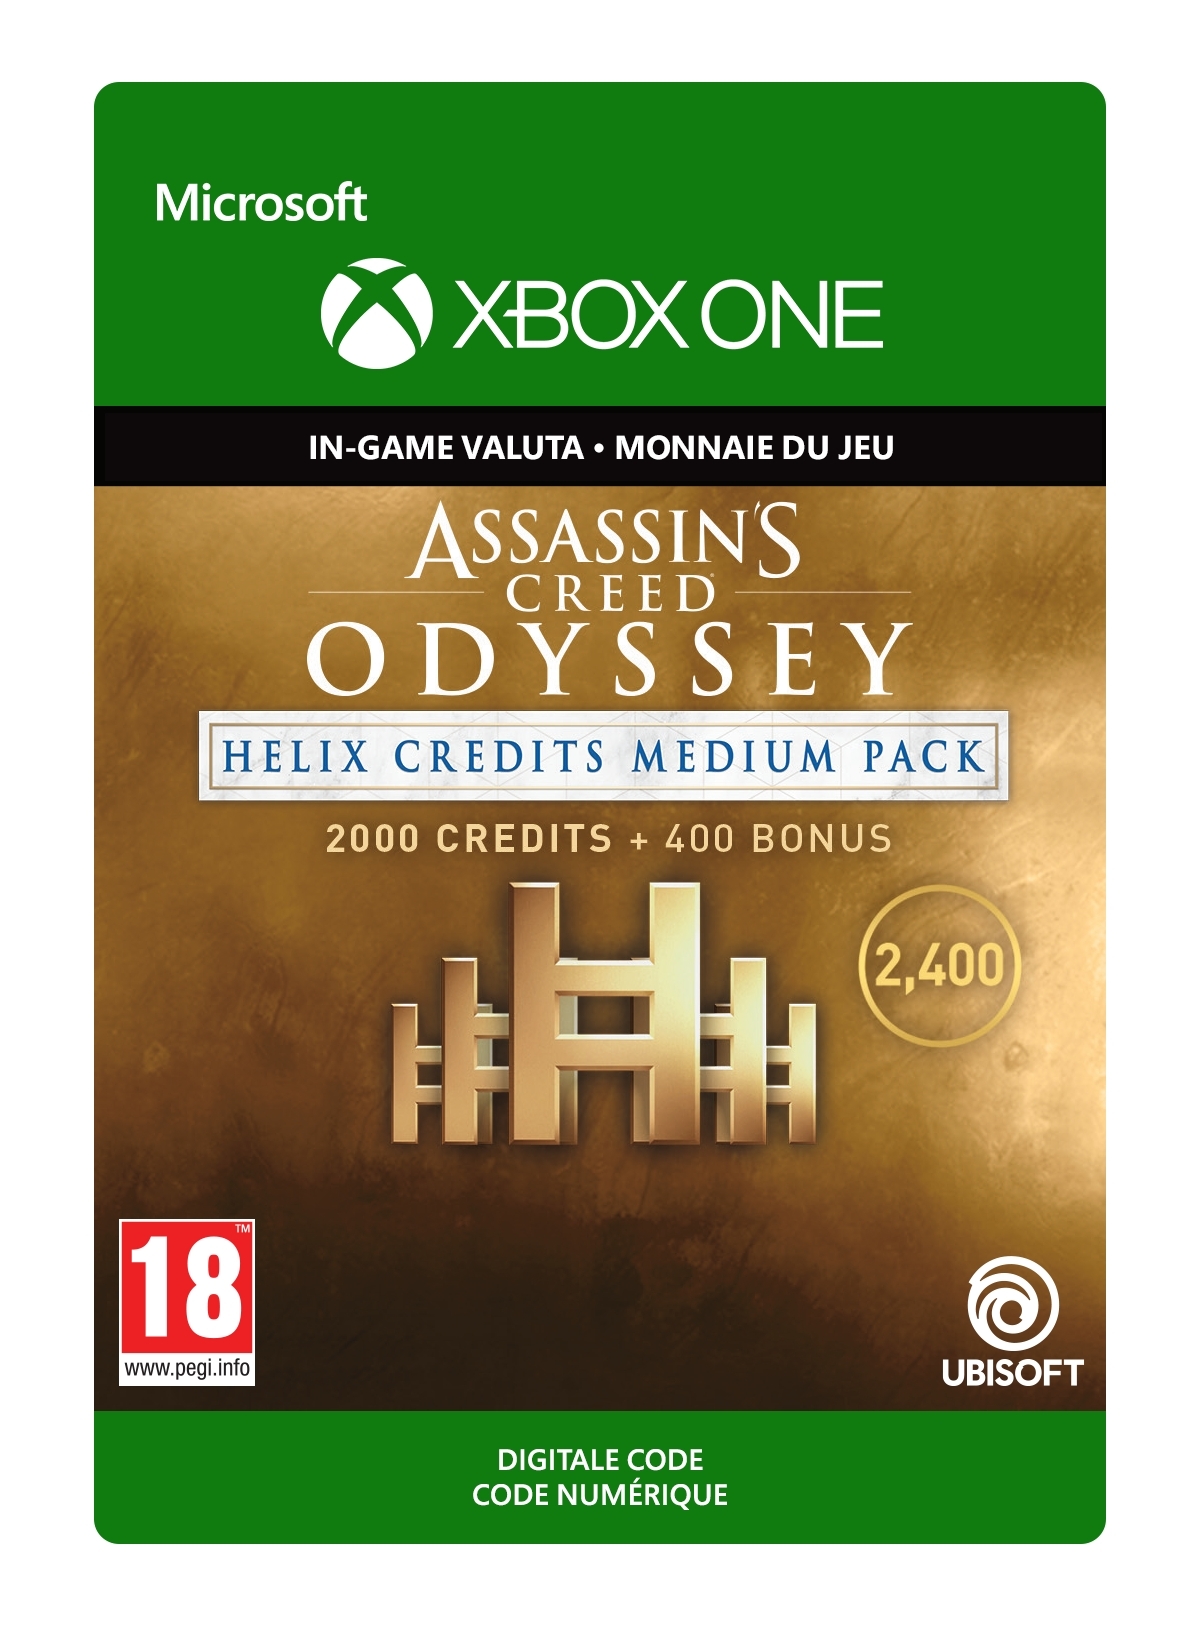 2400 Xbox Assassin's Creed Odyssey Helix Credits Medium Pack